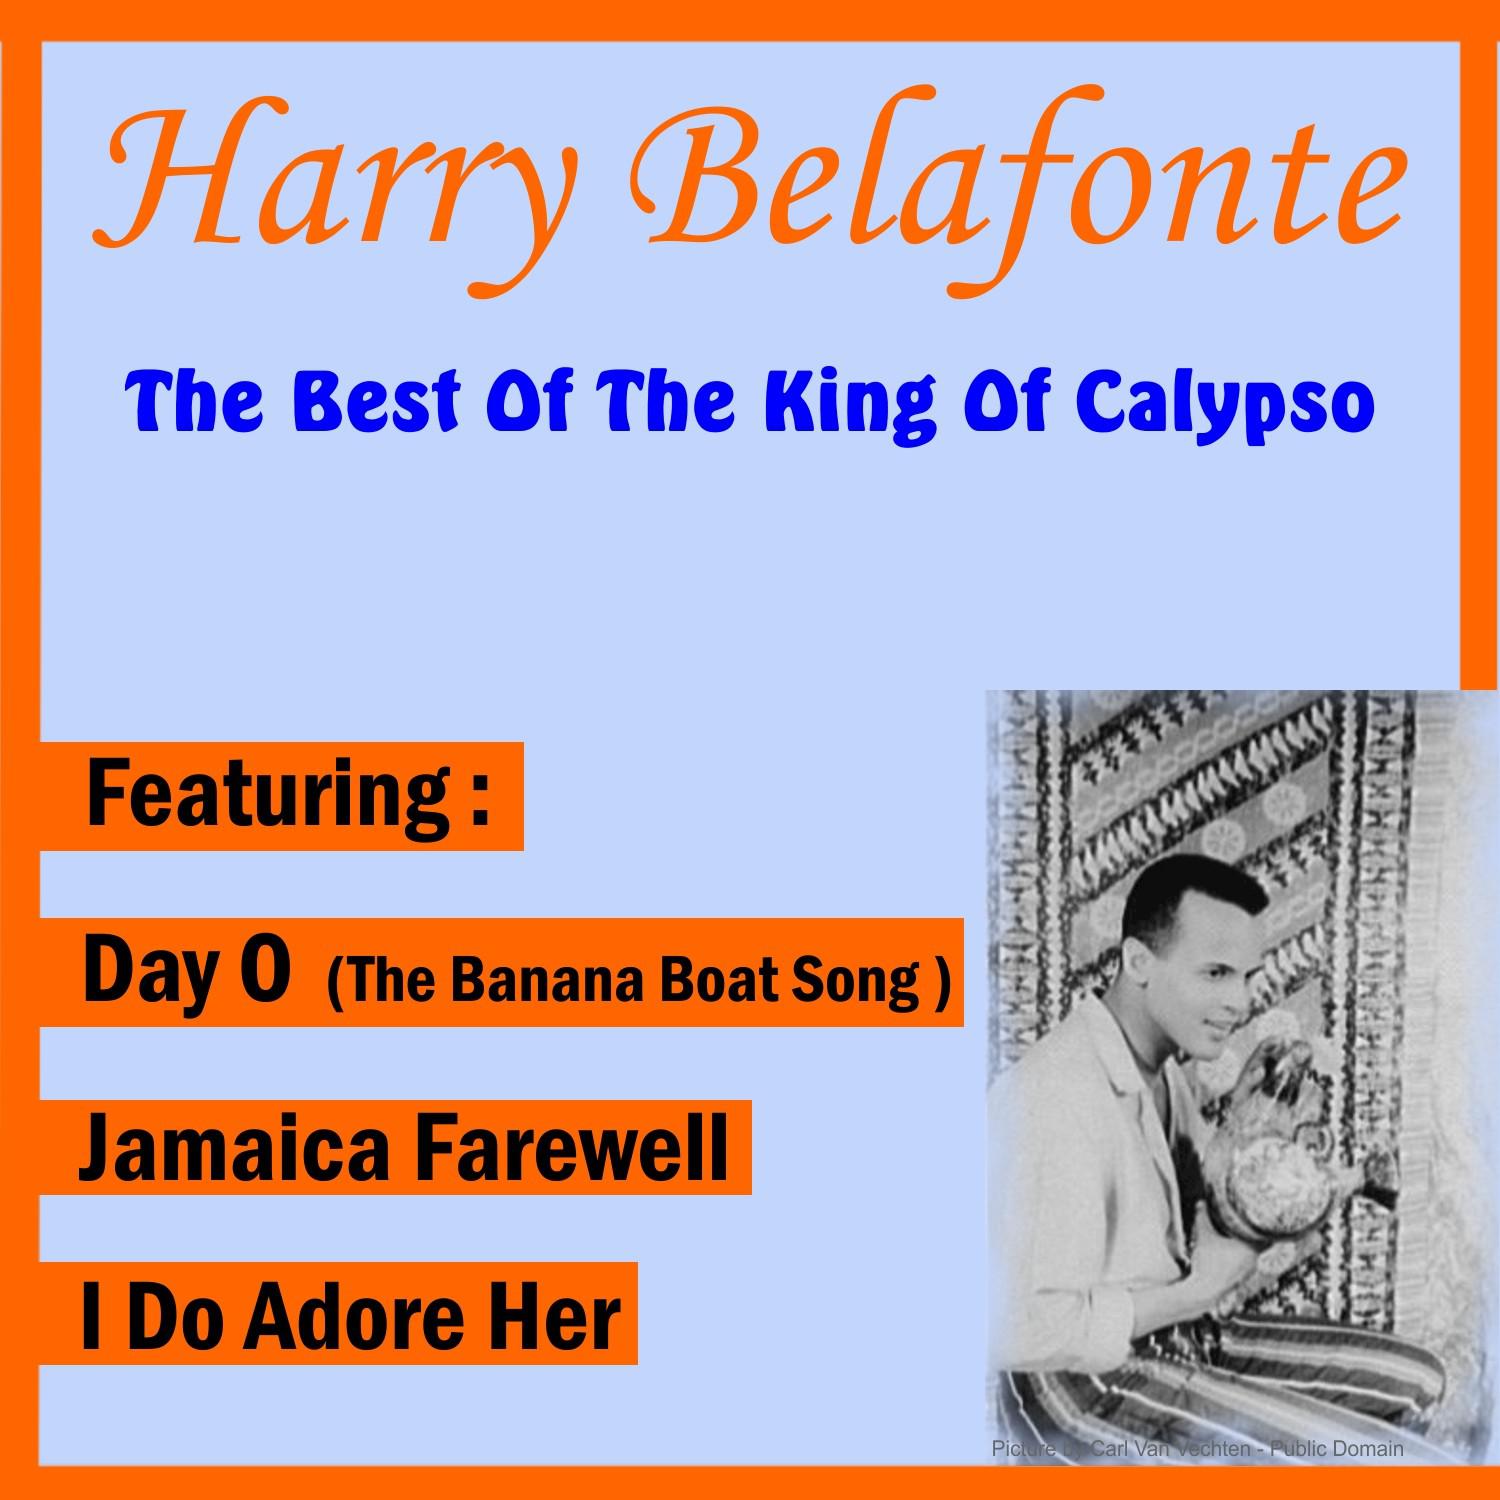 The Best of the King of Calypso